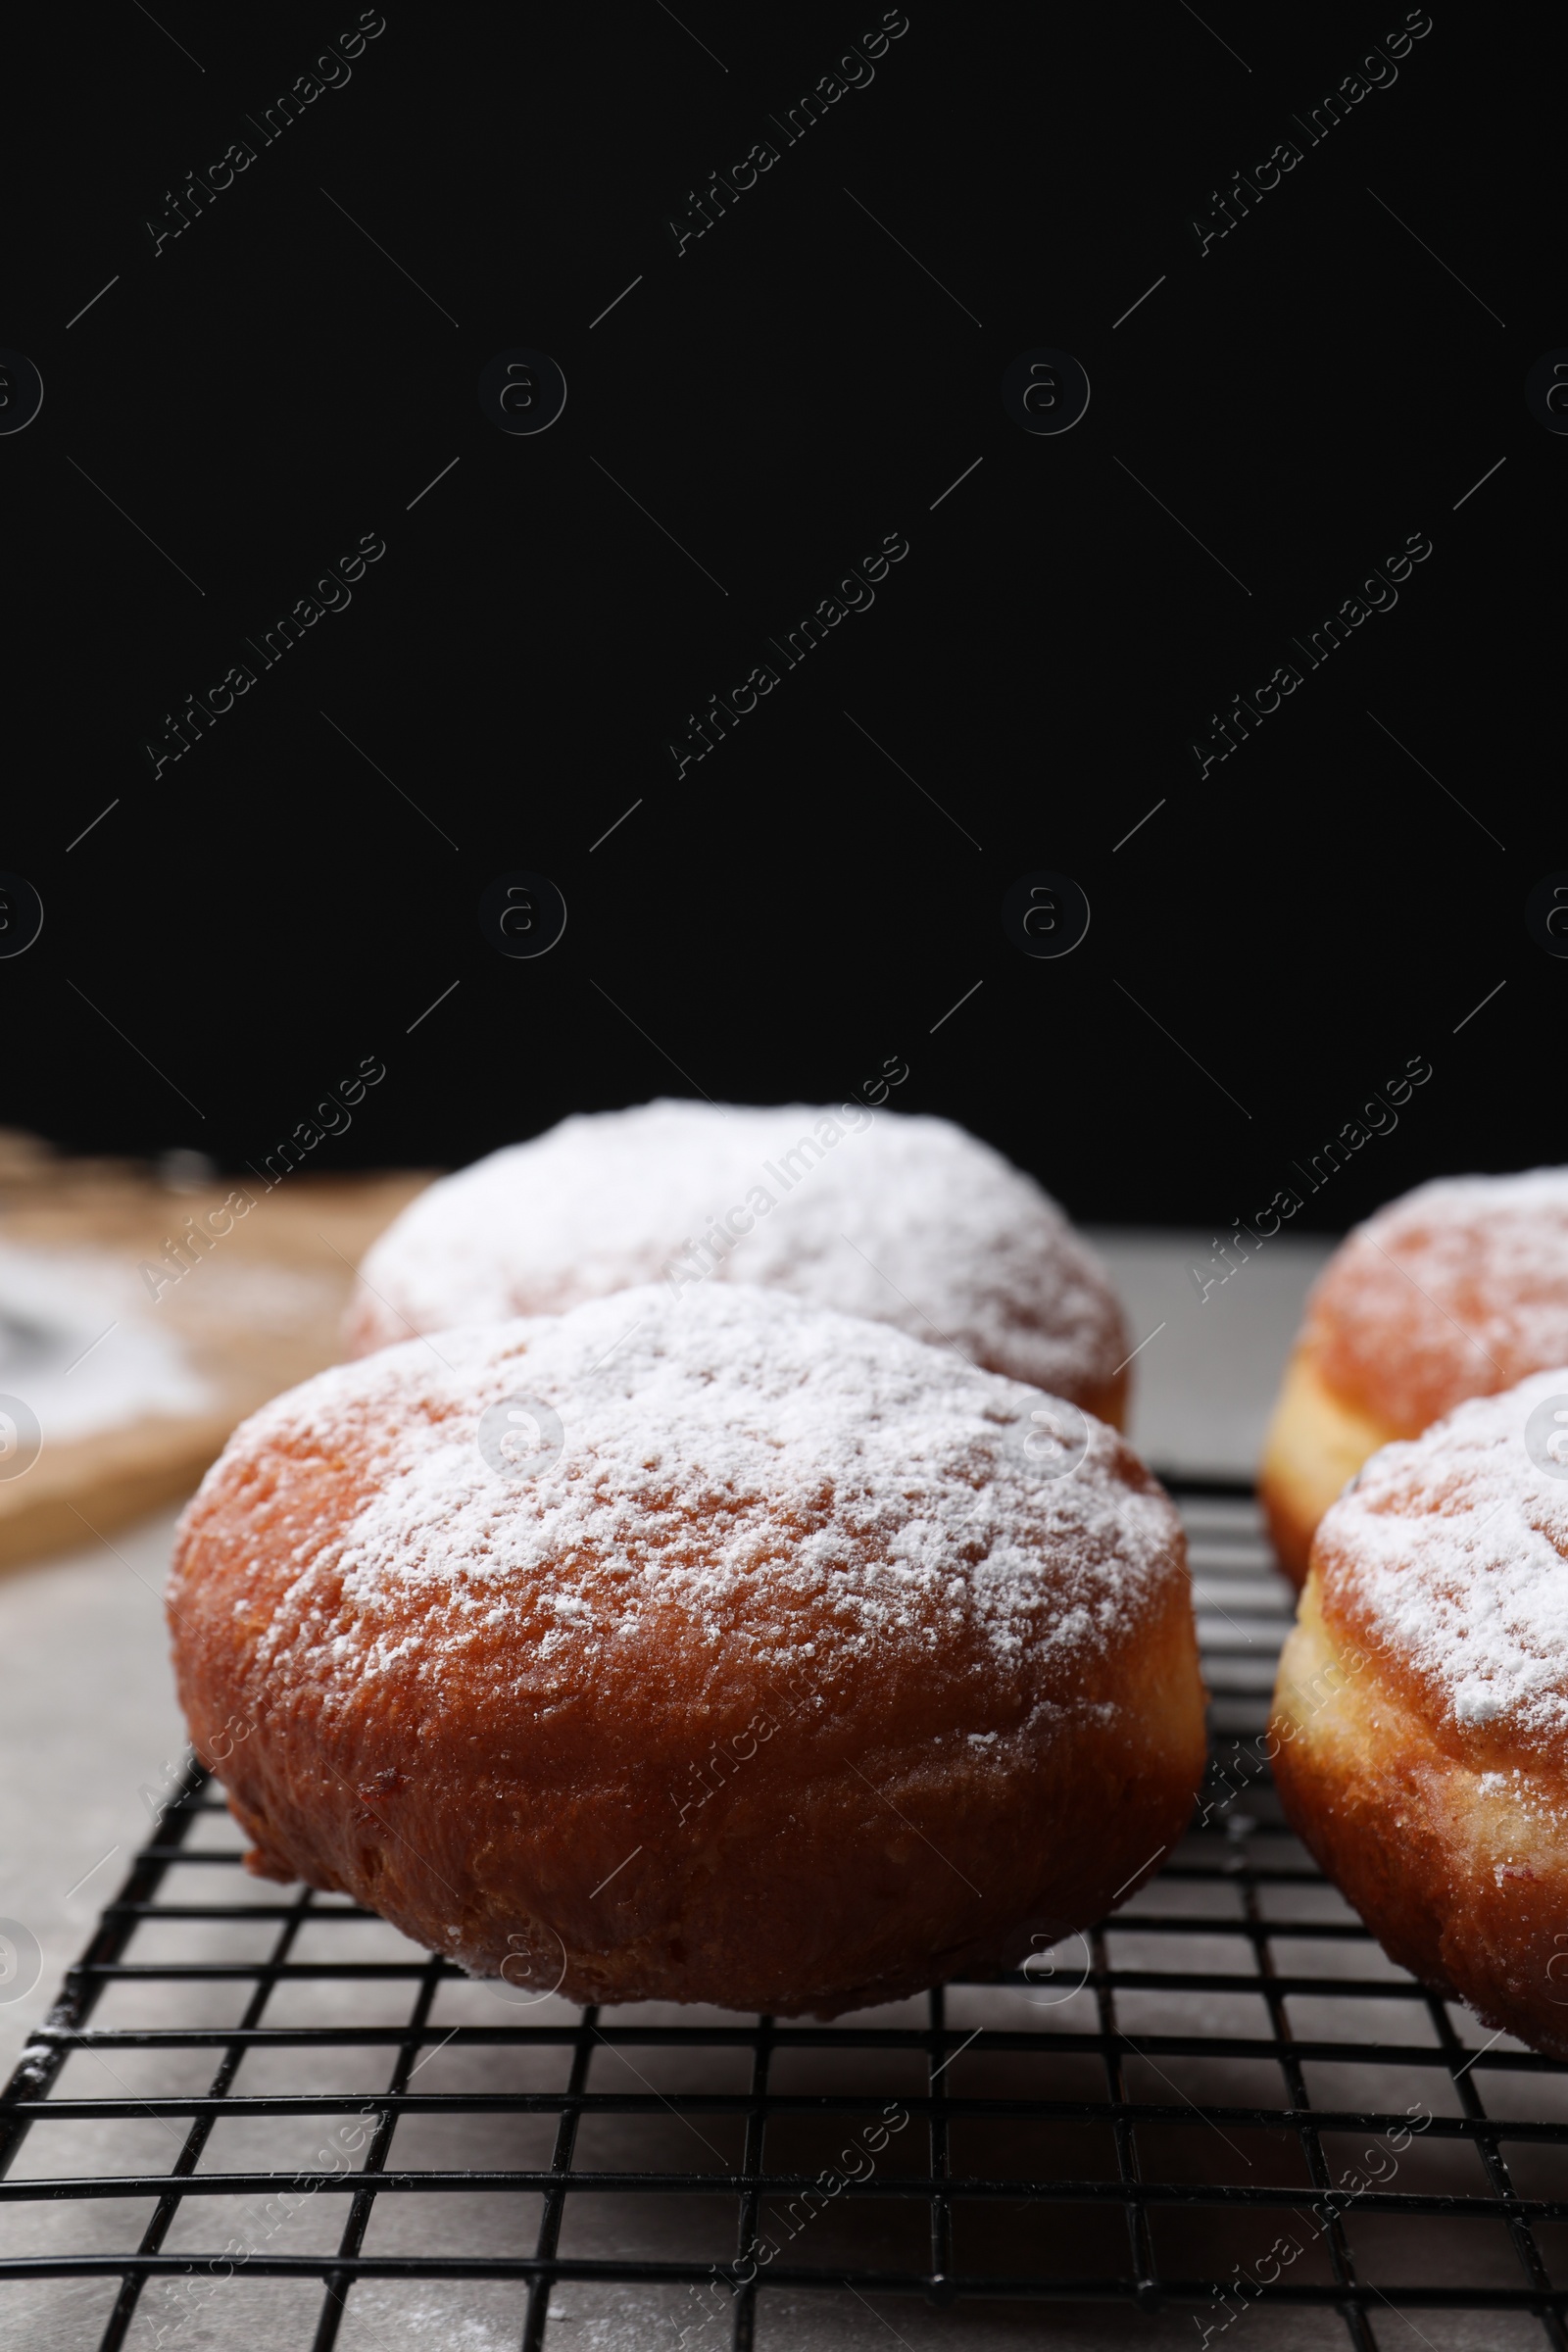 Photo of Delicious sweet buns on table against black background, space for text